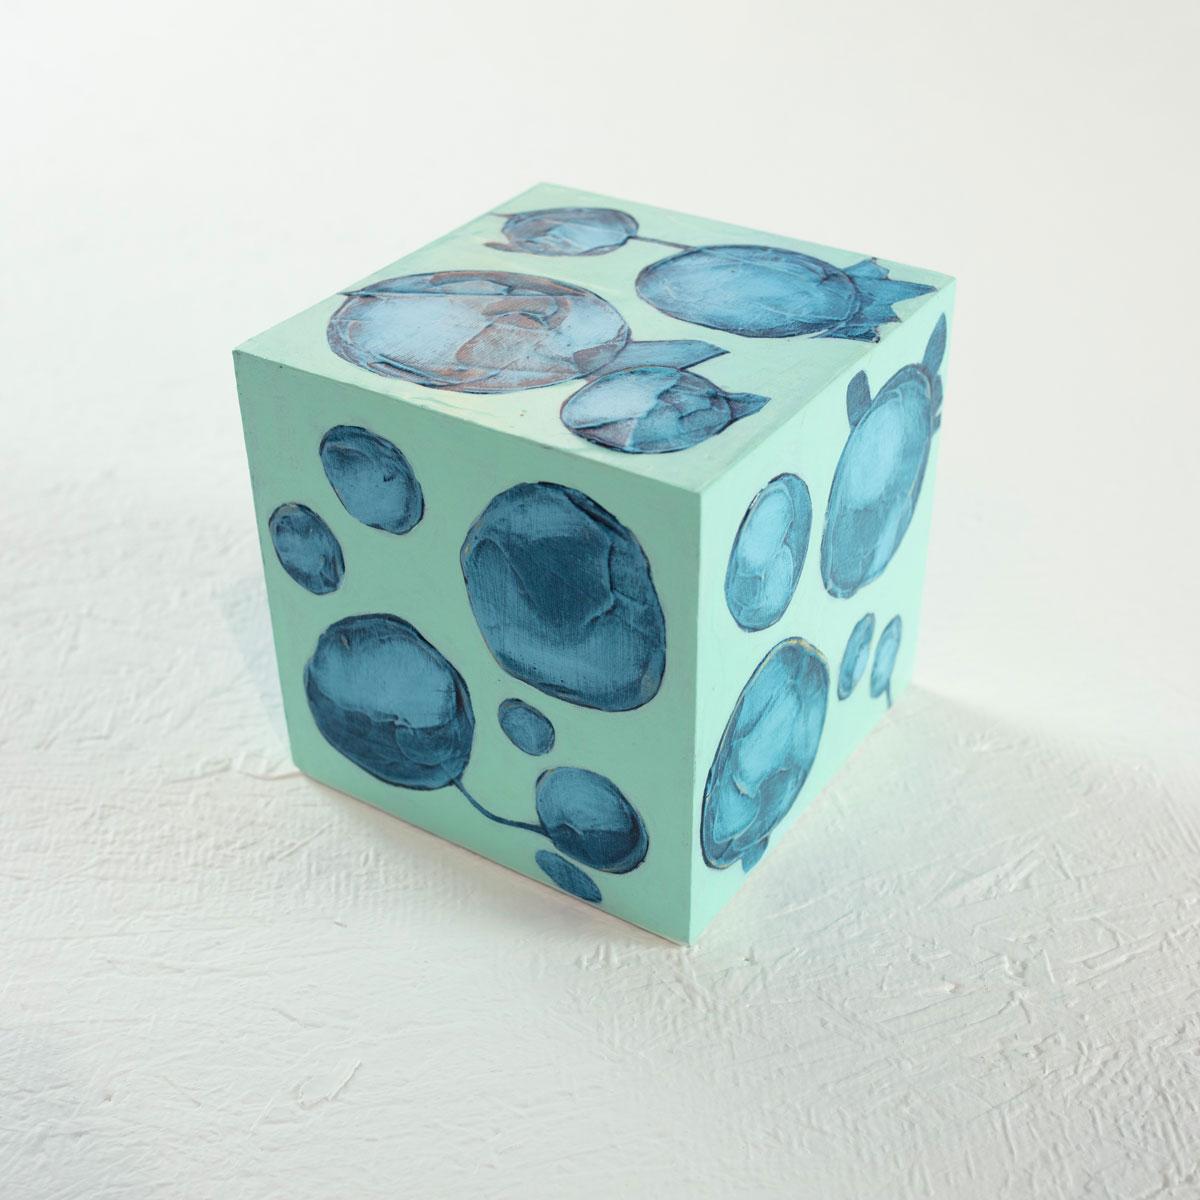 Sofie Swann Abstract Painting - "Little Swann 10" Painted Wooden Cube Sculpture